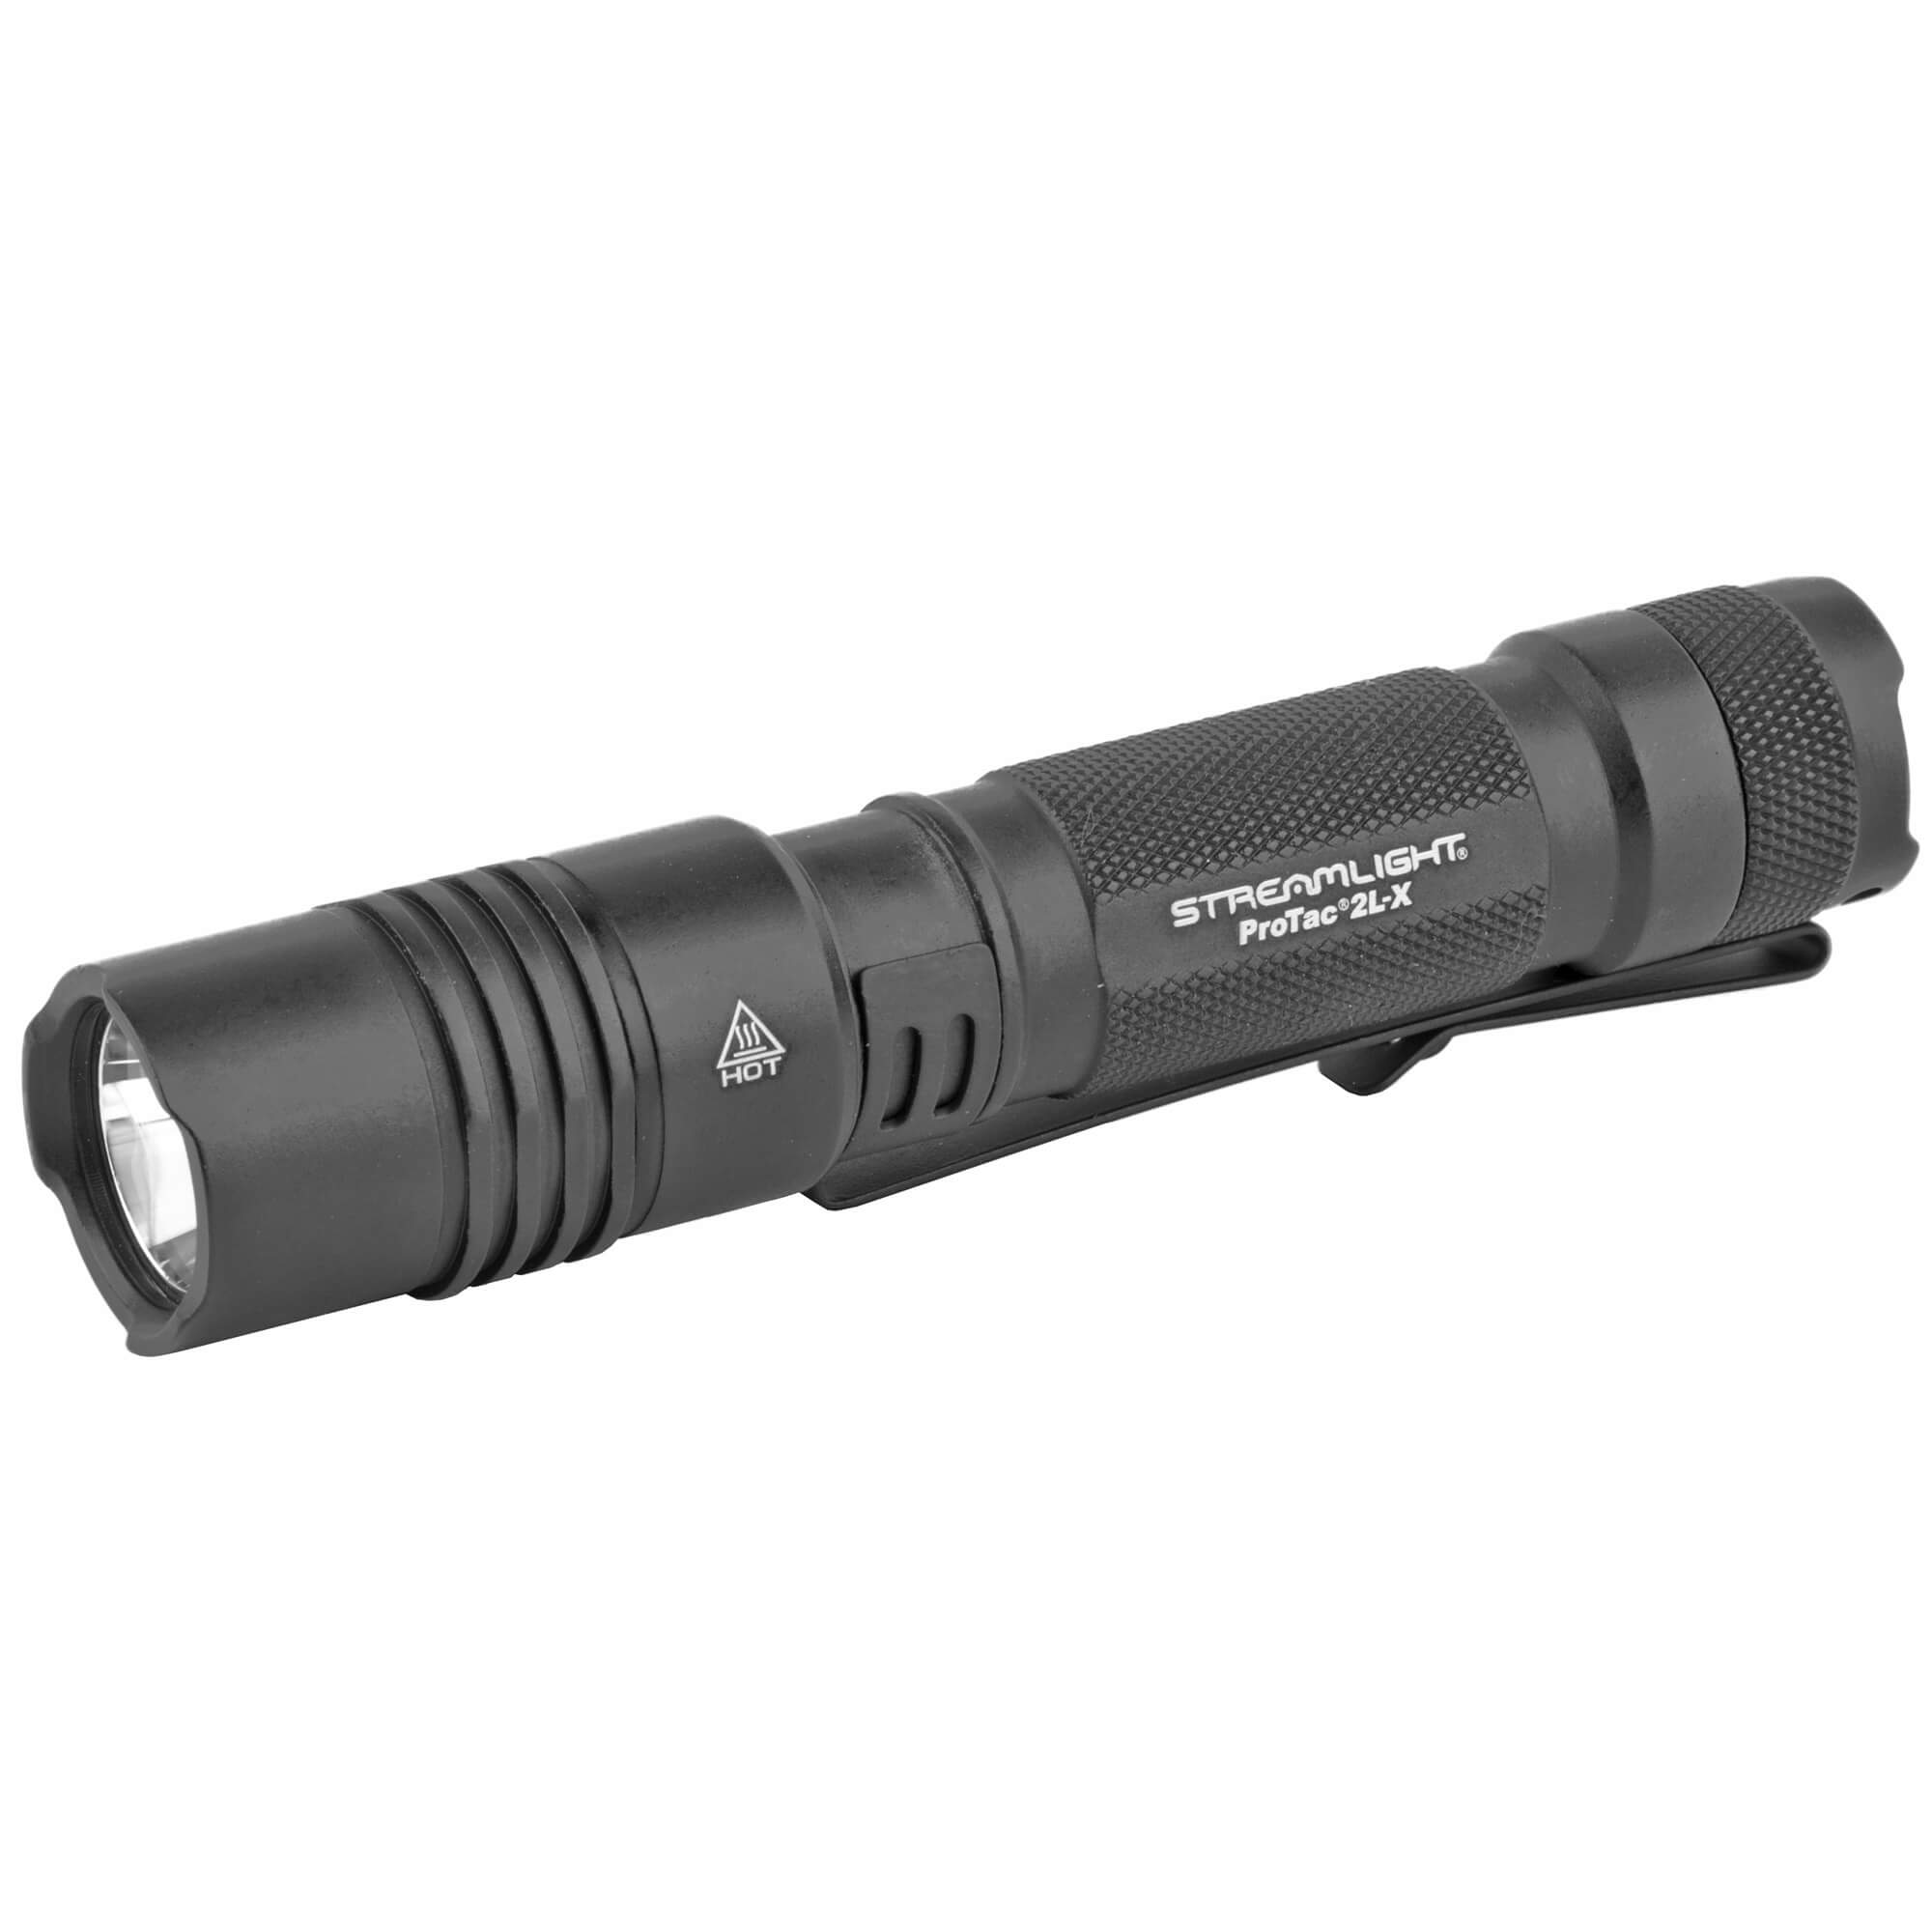 Streamlight 88031 ProTac 2L 350 Lumen Professional Tactical Flashlight with High/Low/Strobe w/ 2 x CR123A Batteries 